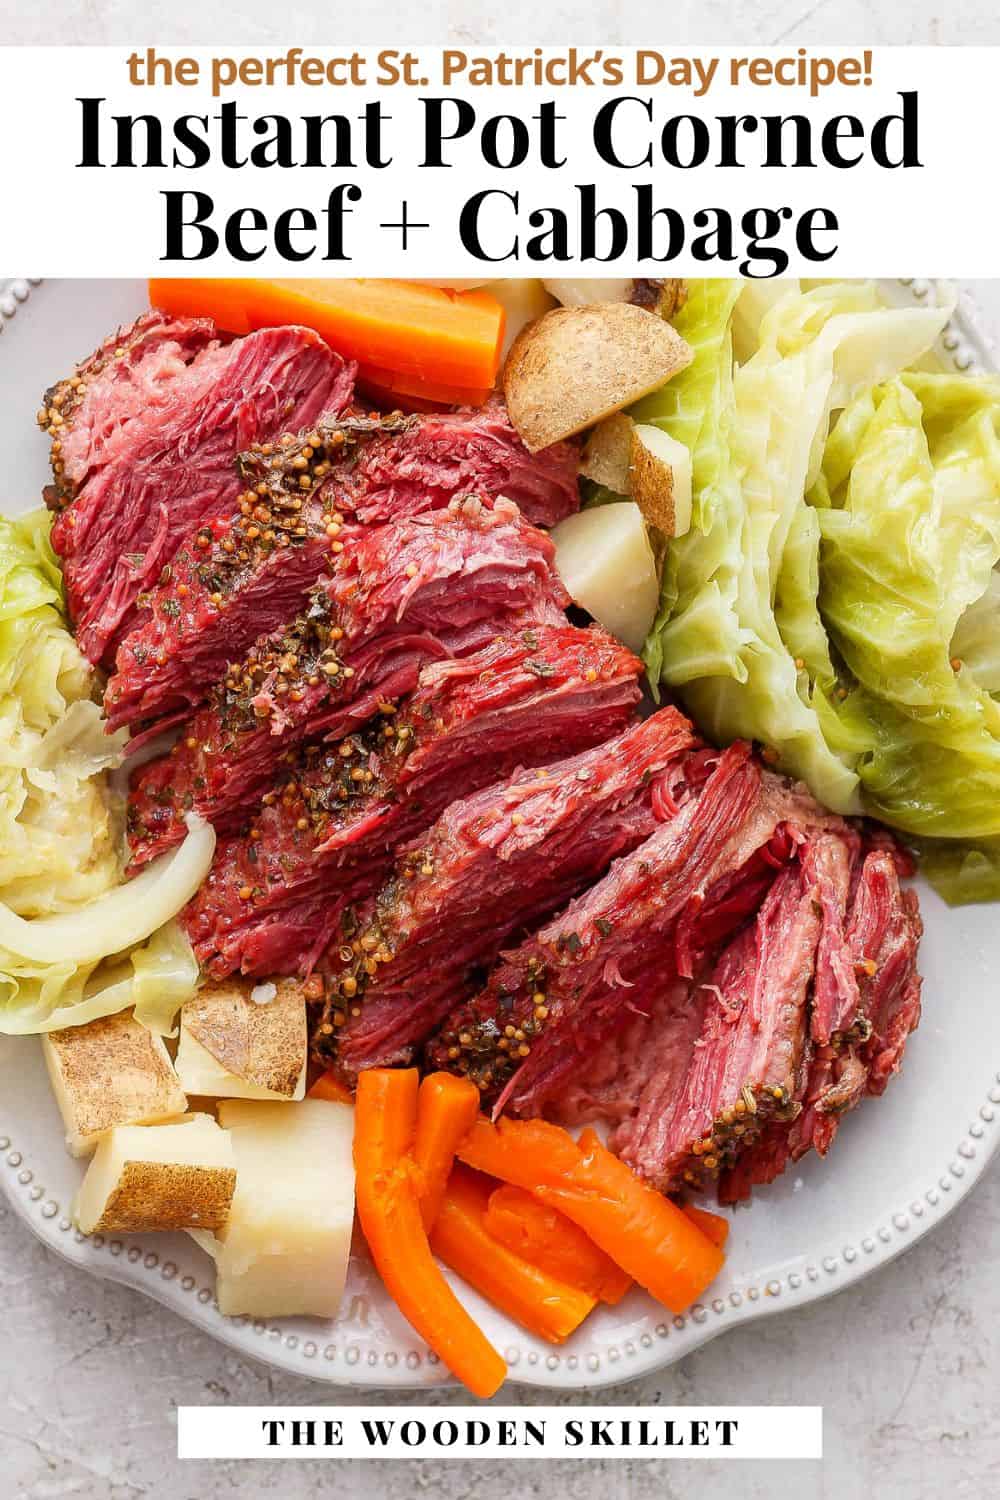 Pinterest image for instant pot corned beef and cabbage.